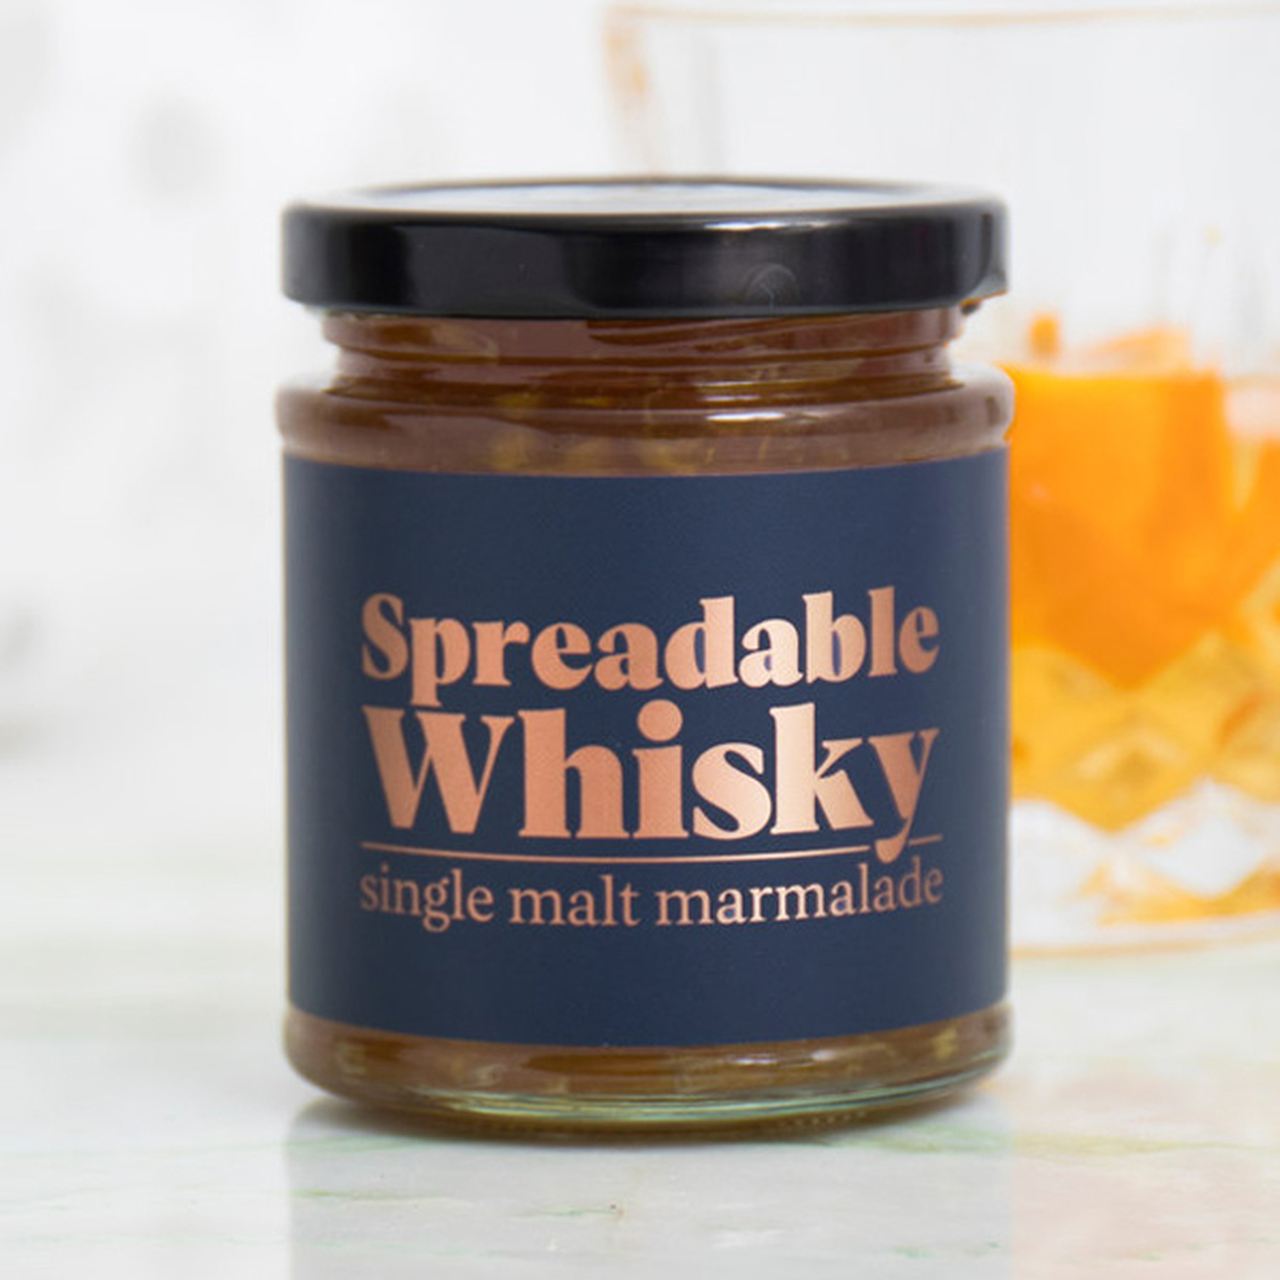 Spreadable-Whisky Unusual Gifts for Christmas